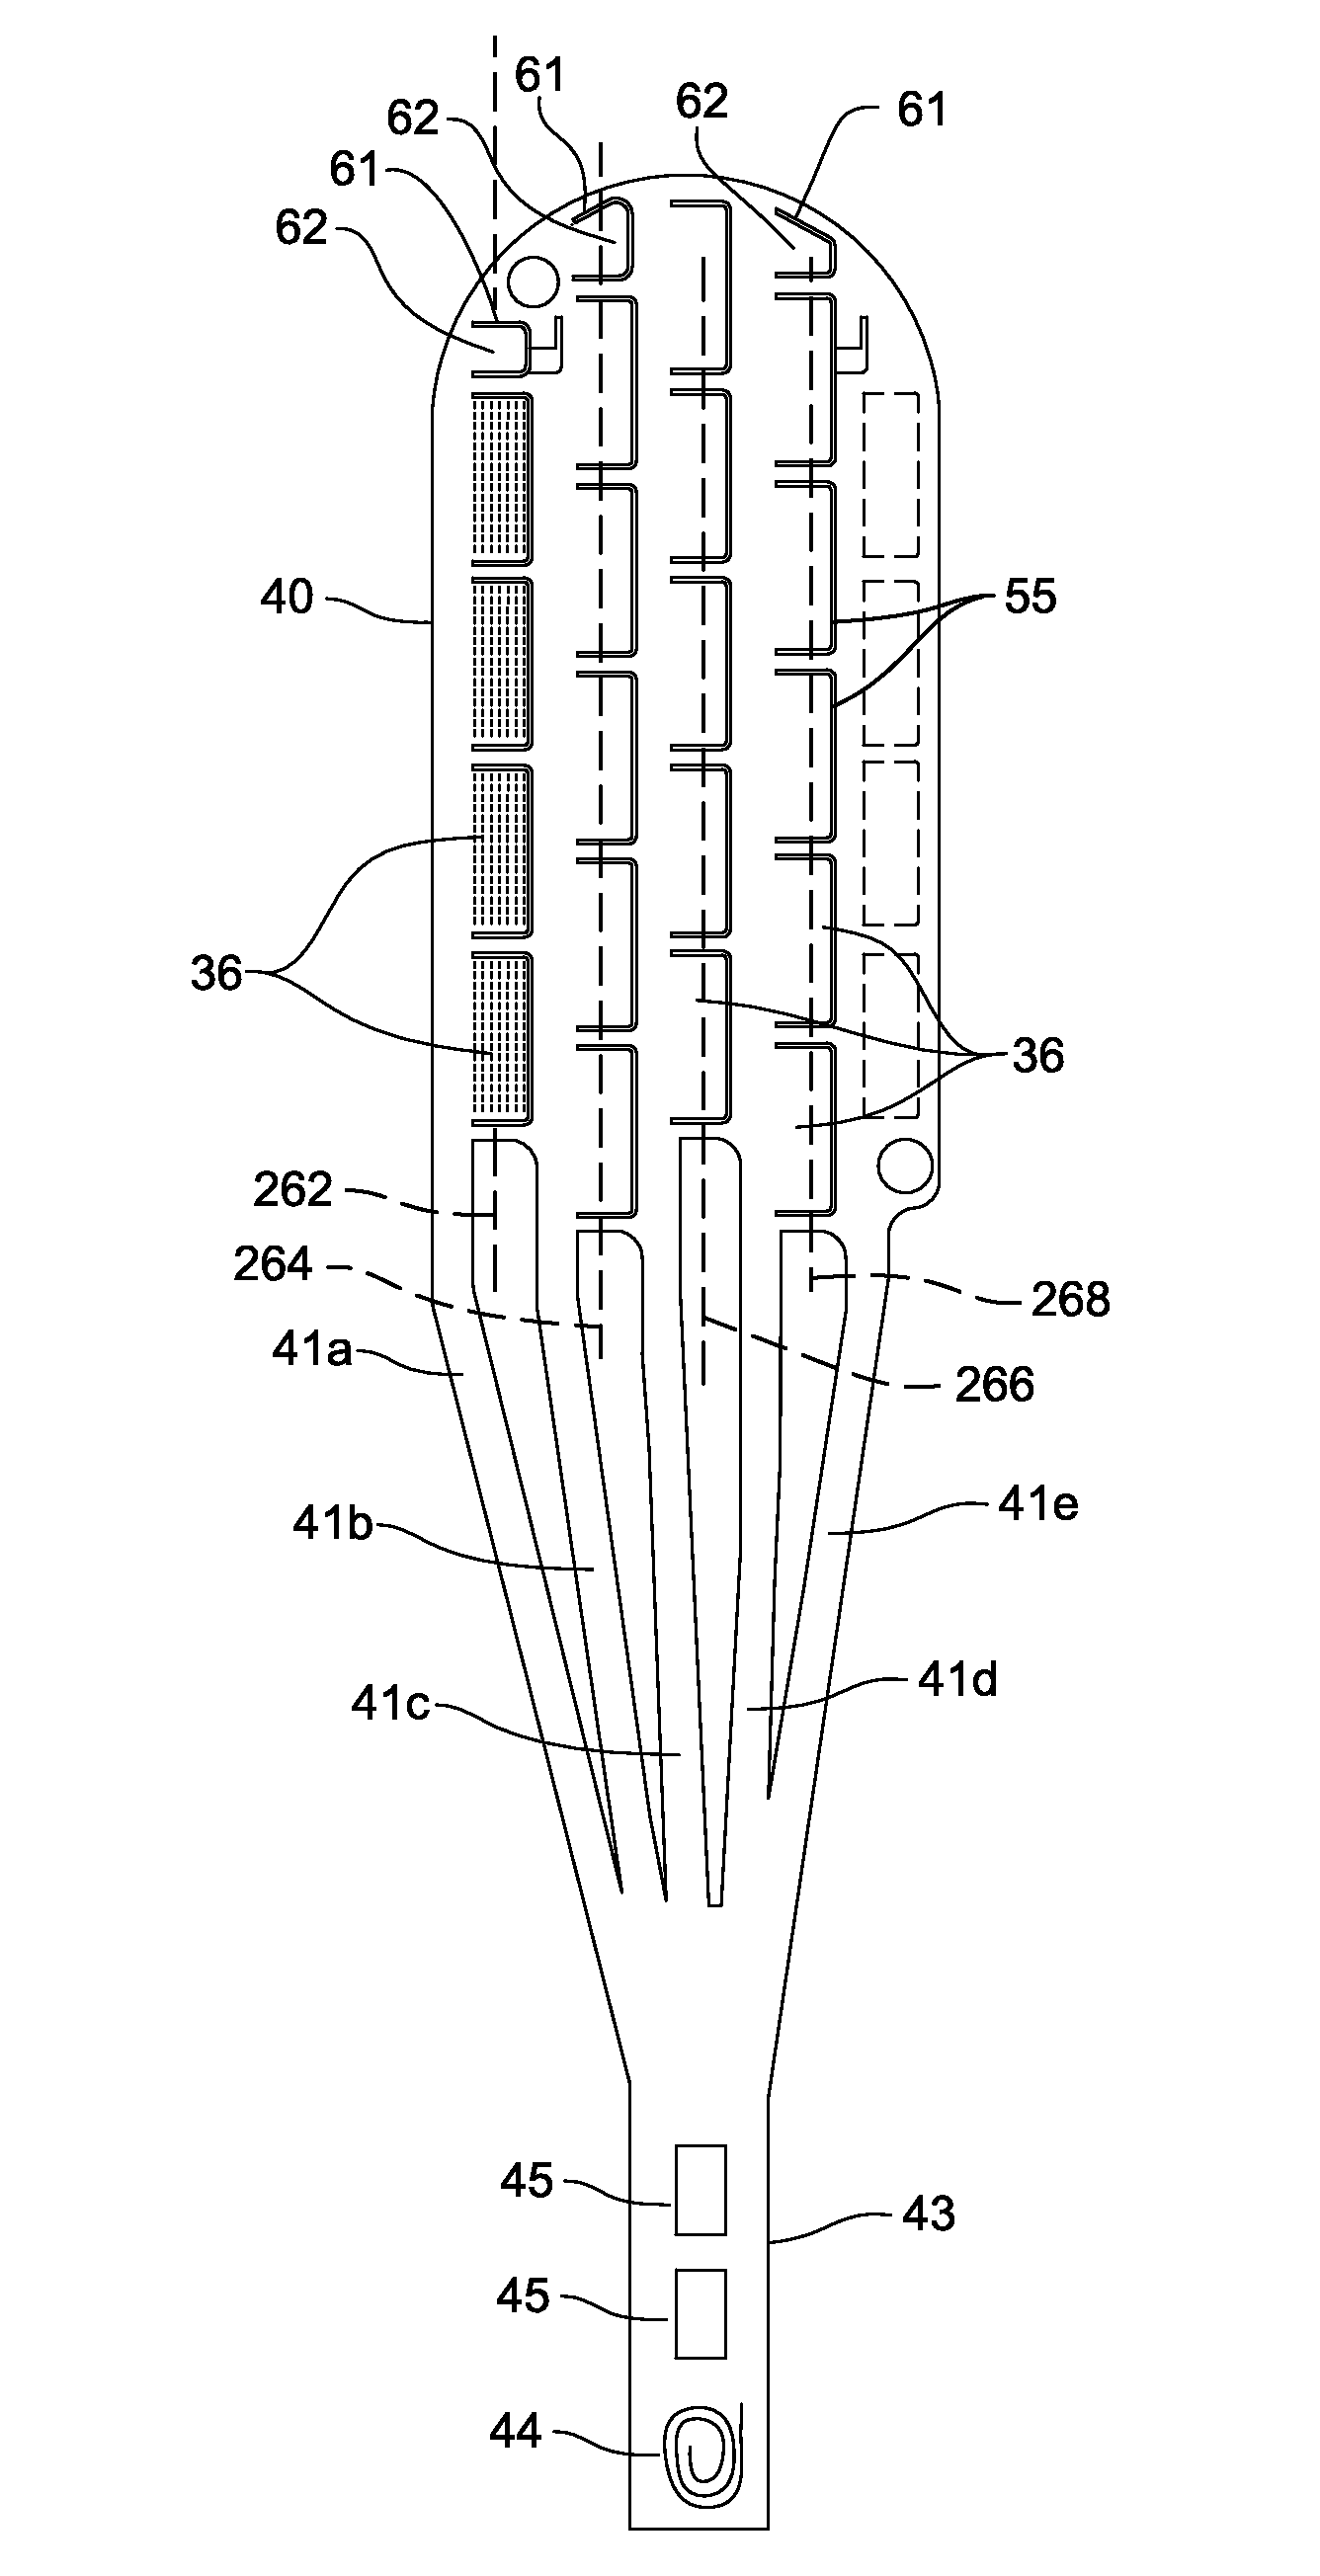 Electrode array and deployment assembly including an electrode array that is folded into a cannula that is narrower in width than the array